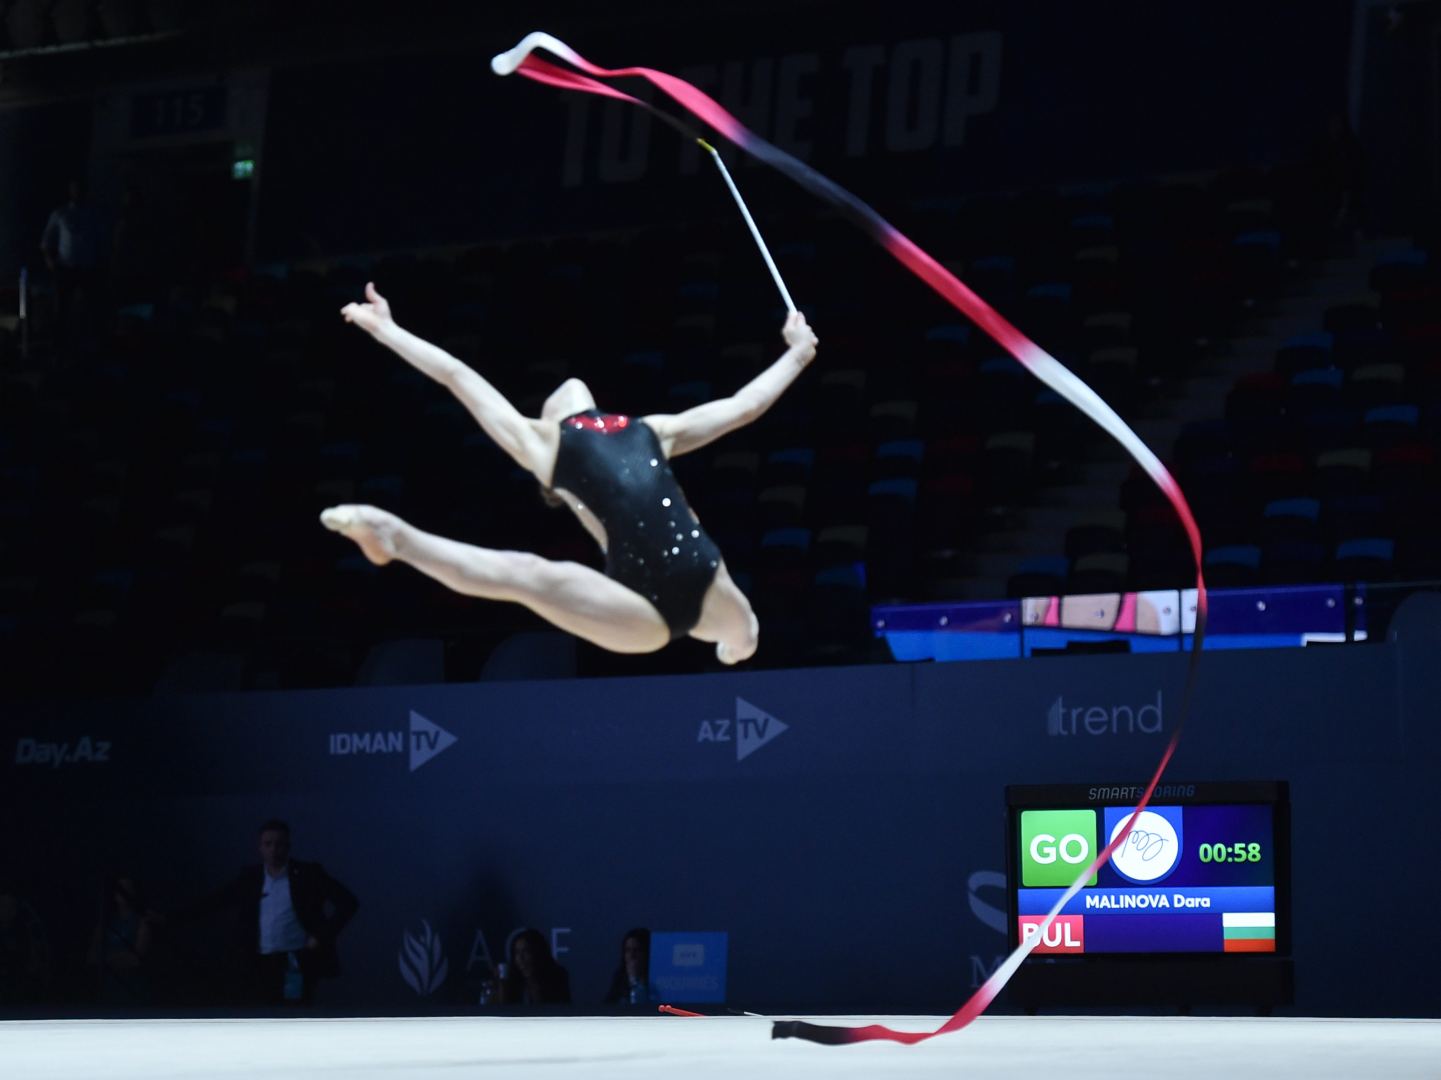 Azerbaijani graces reach final following second day of AGF Trophy Int'l Tournament in Rhythmic Gymnastics competitions among juniors